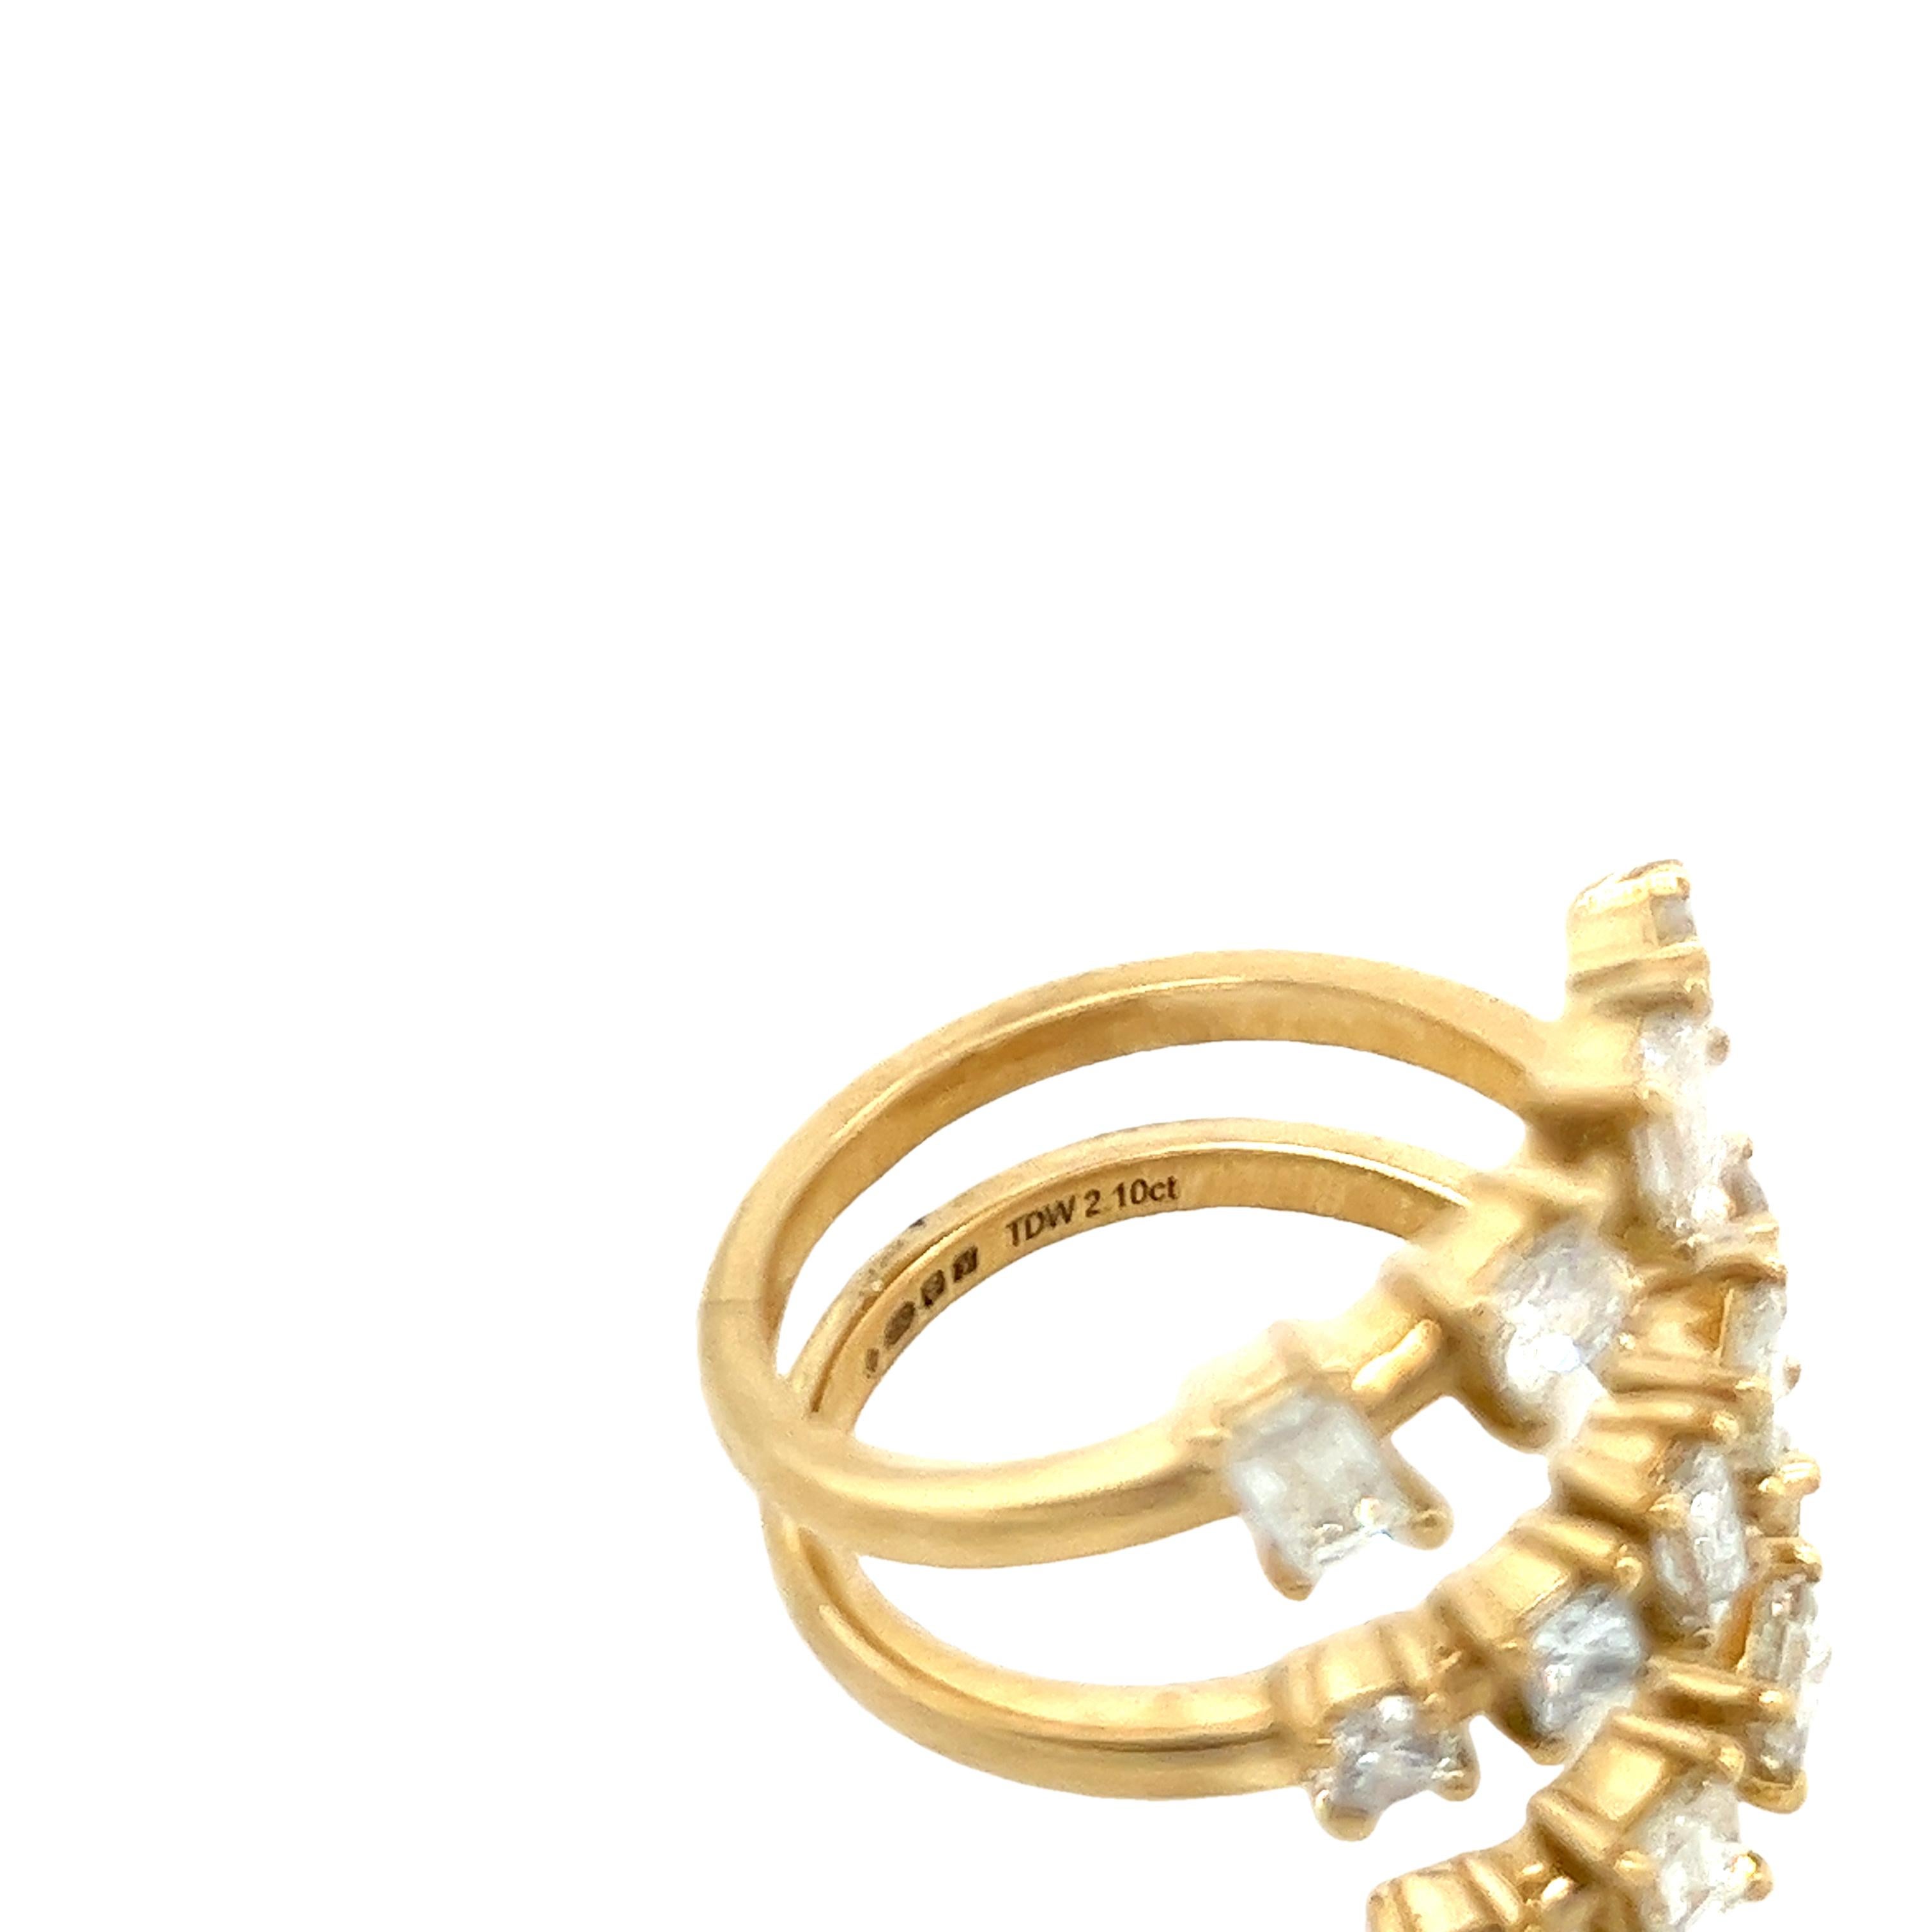 Multi Diamond Shaped Coil Ring, 2.10ct in total Set in 18ct Yellow Gold In New Condition For Sale In London, GB